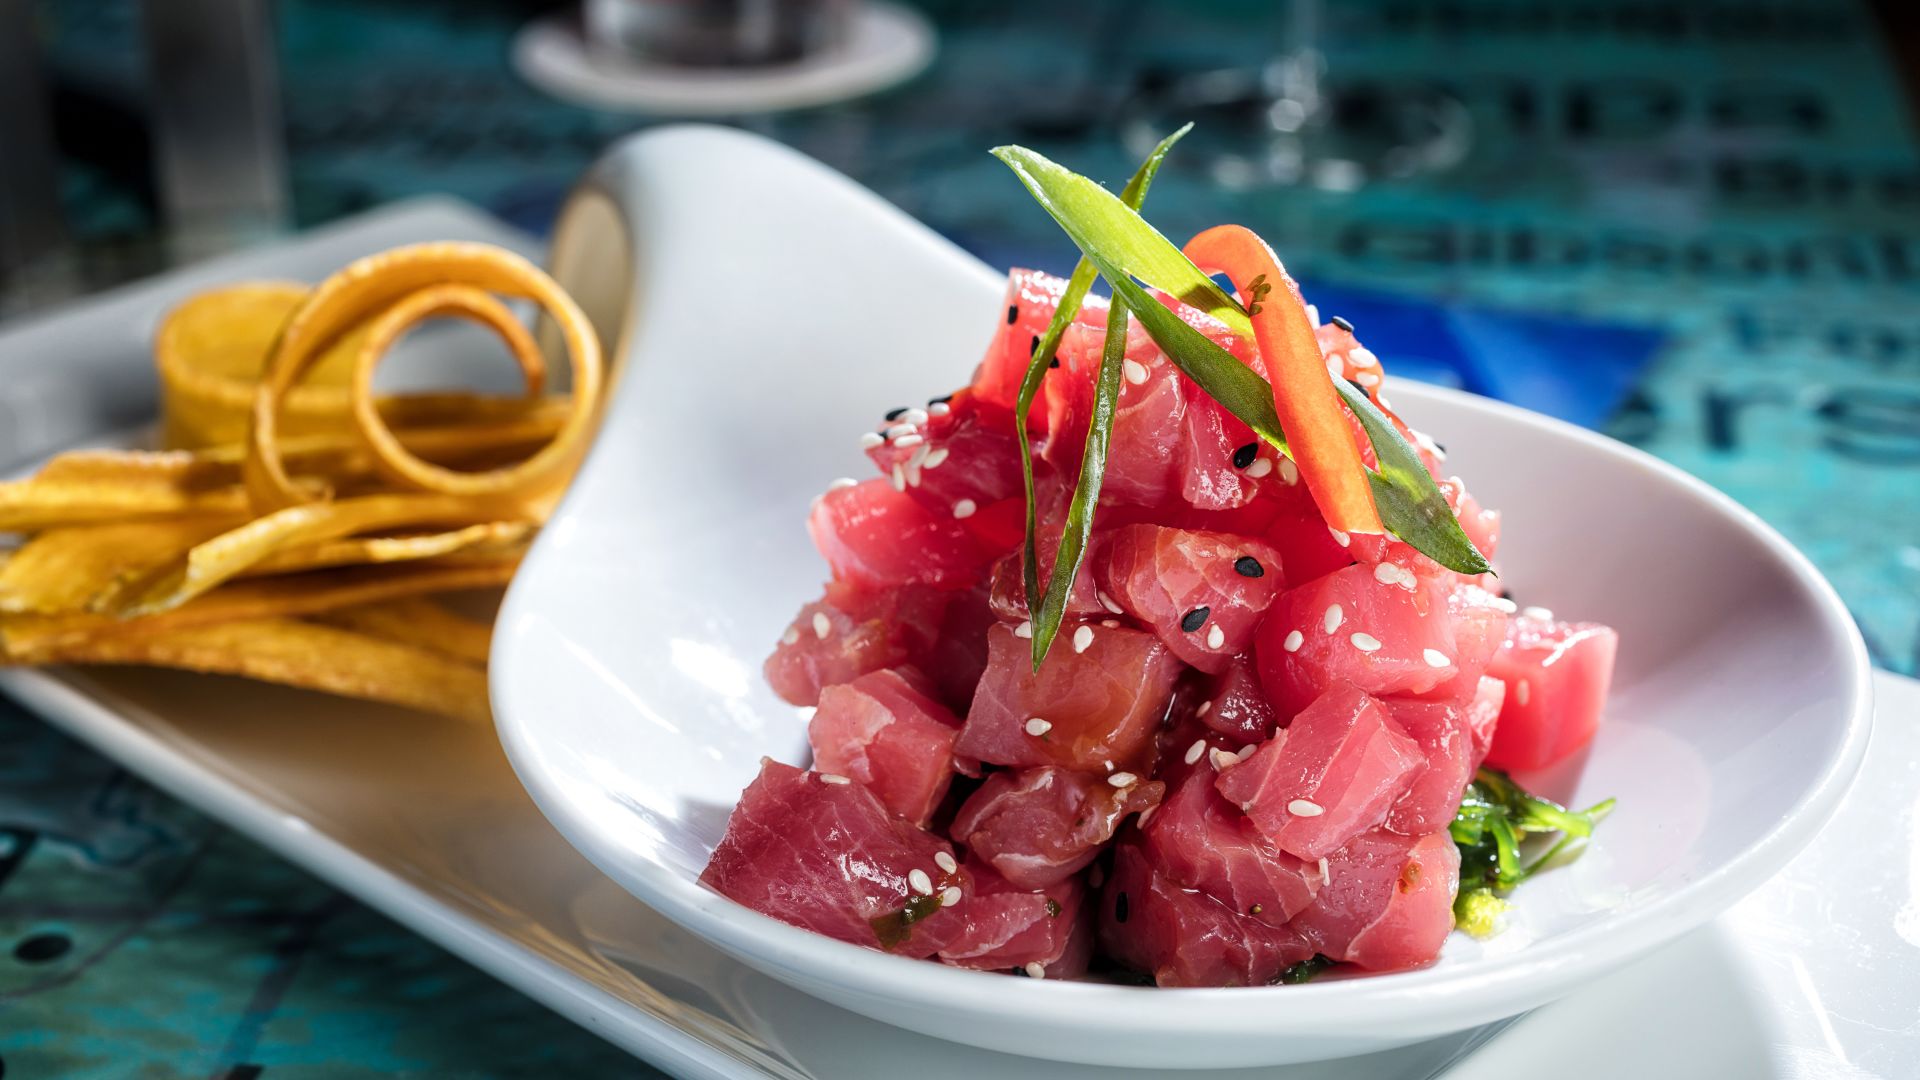 A Plate Of Ahi Tuna On A Table At Margaritaville Resort